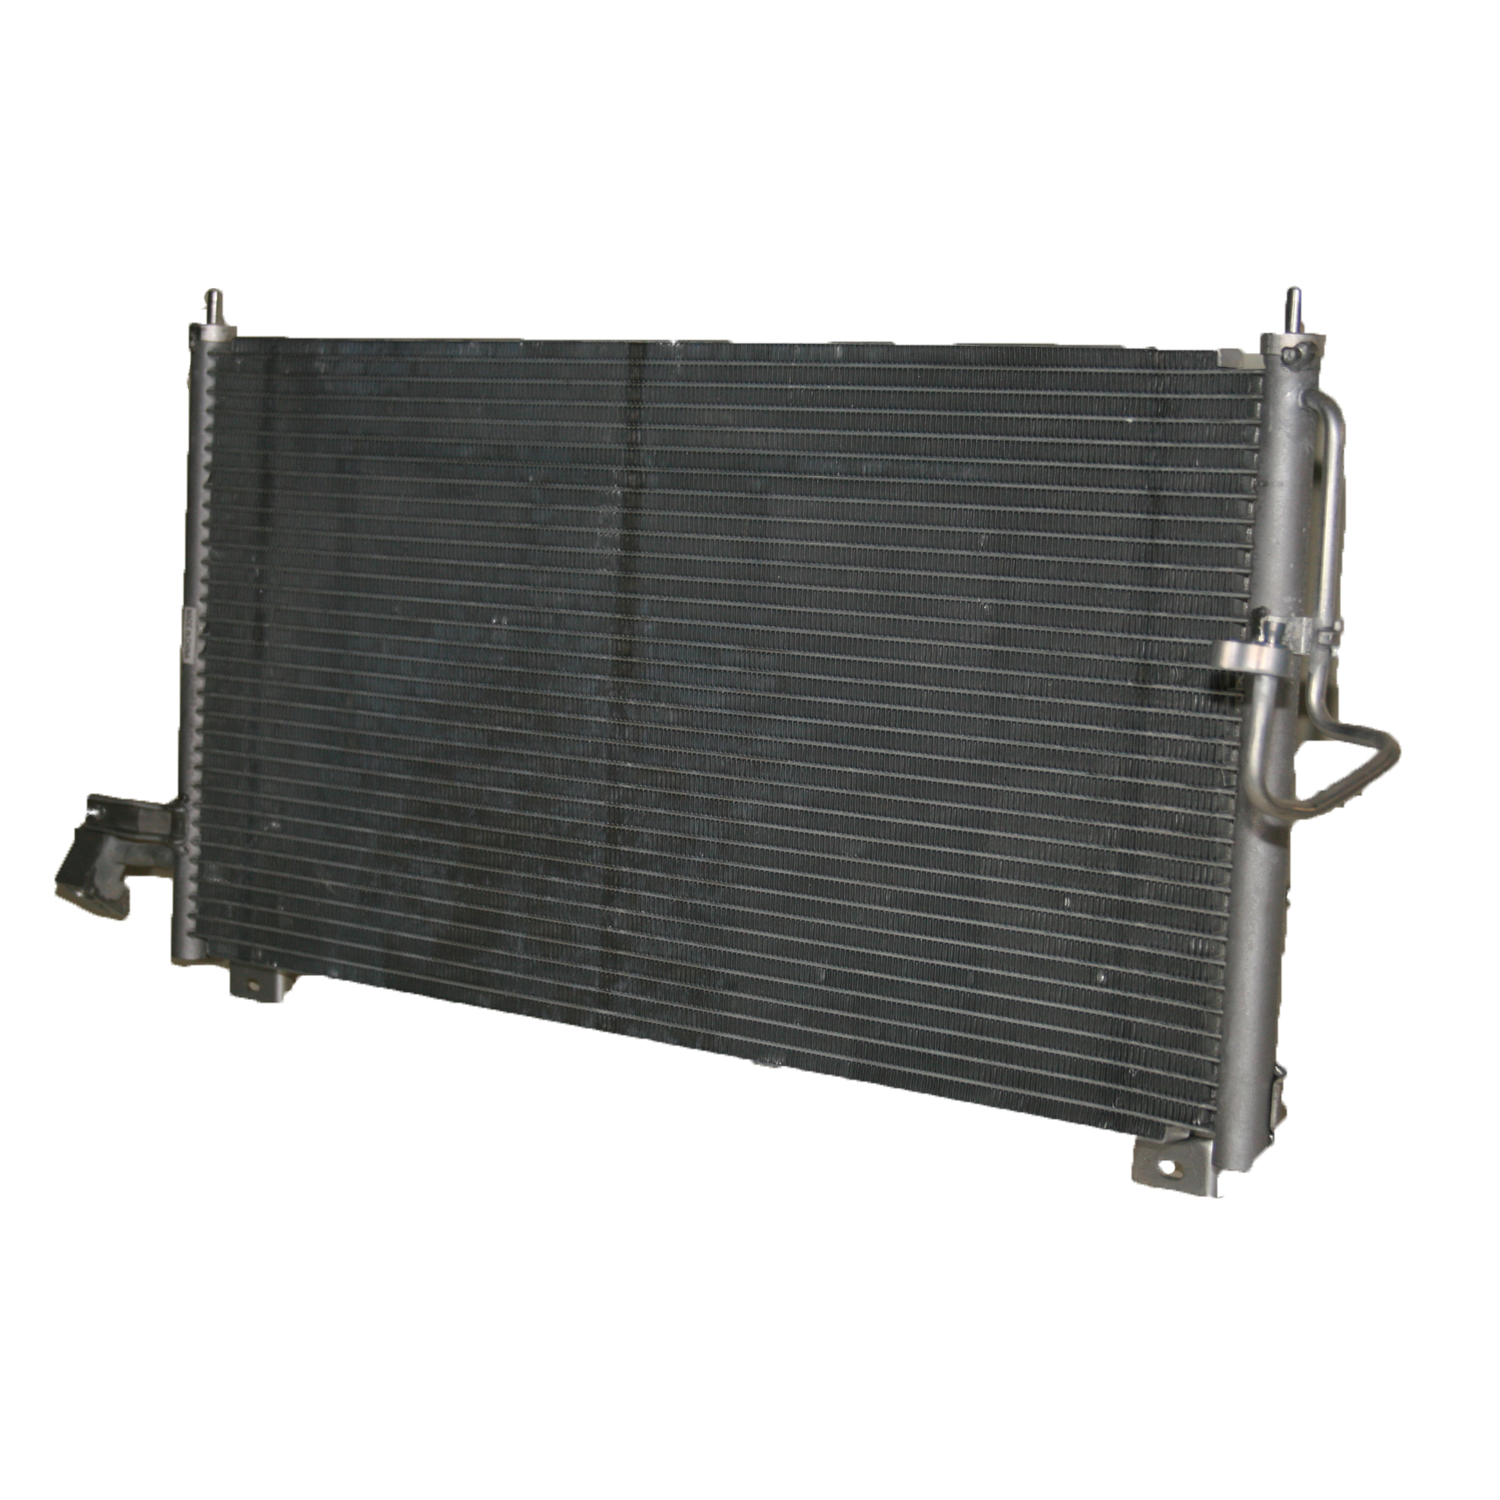 TCW Condenser 44-3117 New Product Image field_60b6a13a6e67c